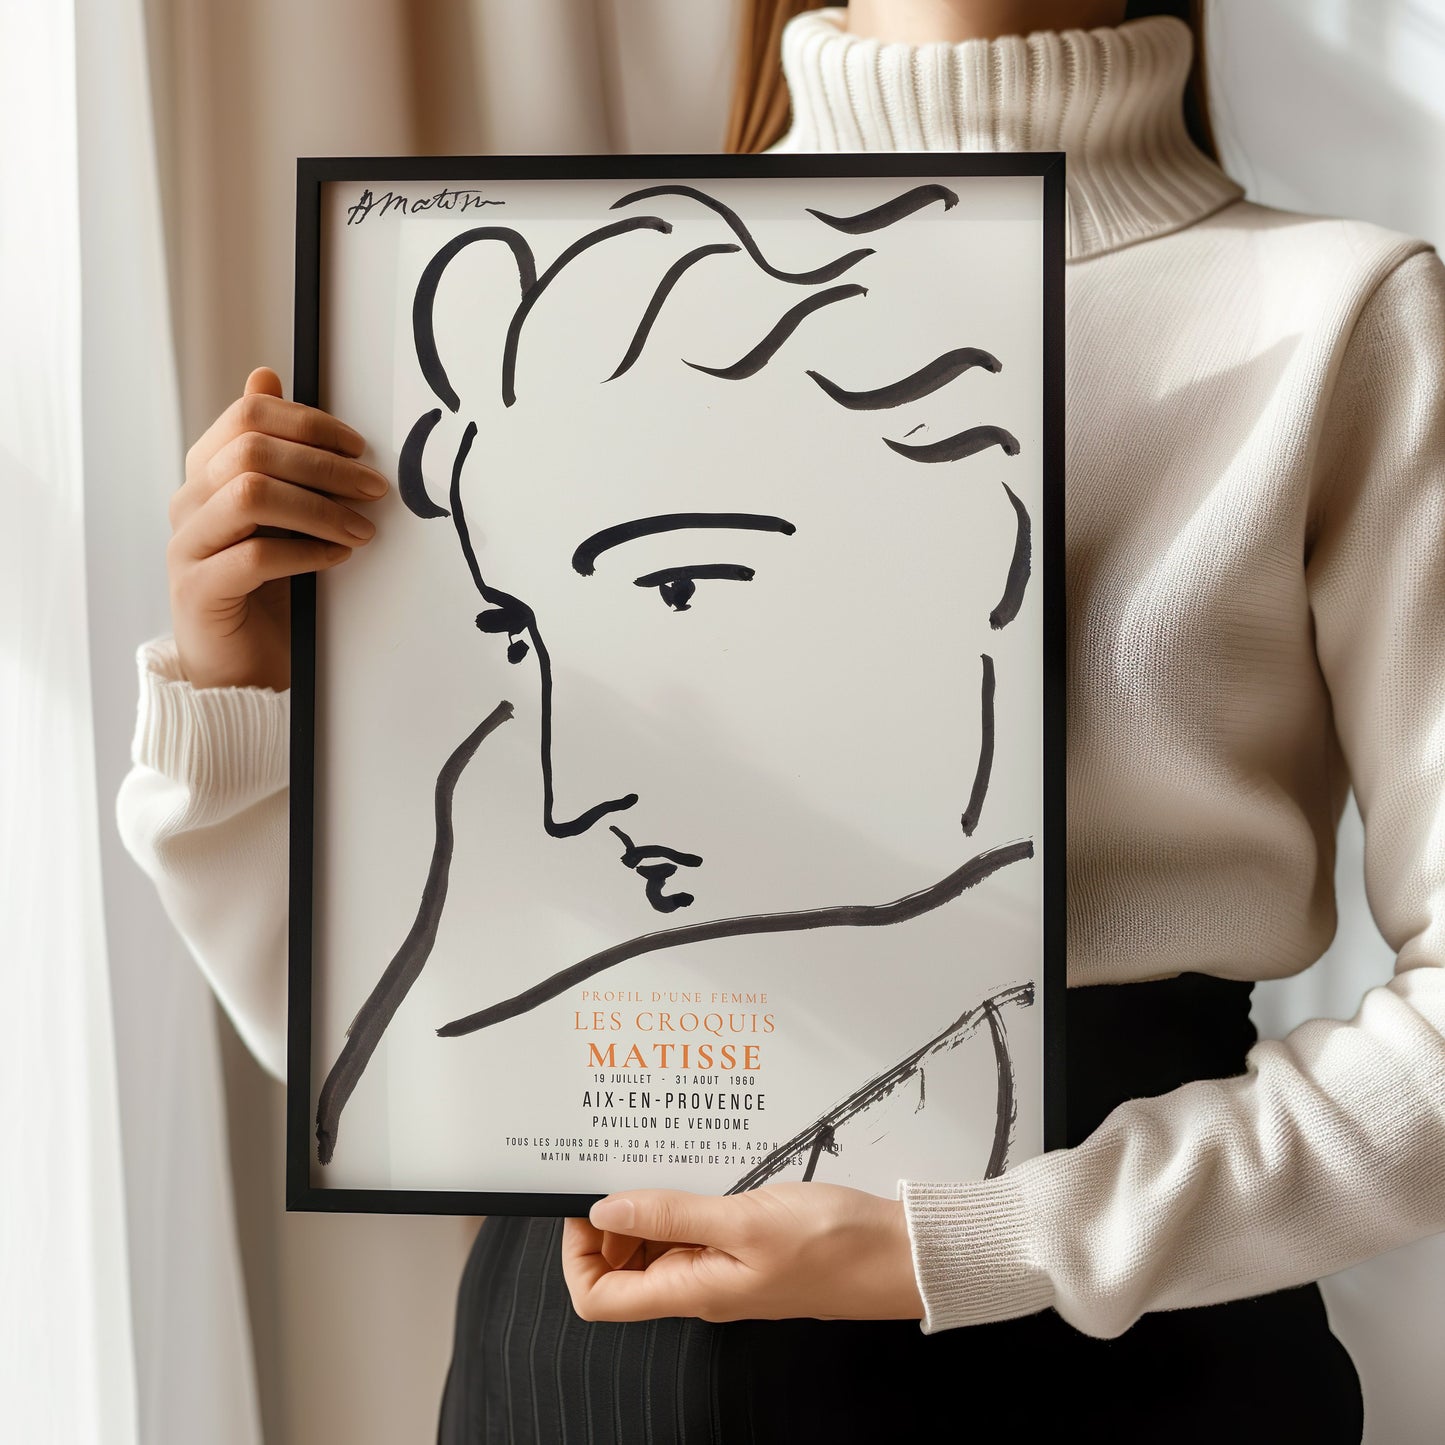 Framed Henri Matisse Profile of a Woman Poster sketch Famous Painting Art Print Retro Vintage Museum Ready to Hang Home Office Decor Gift